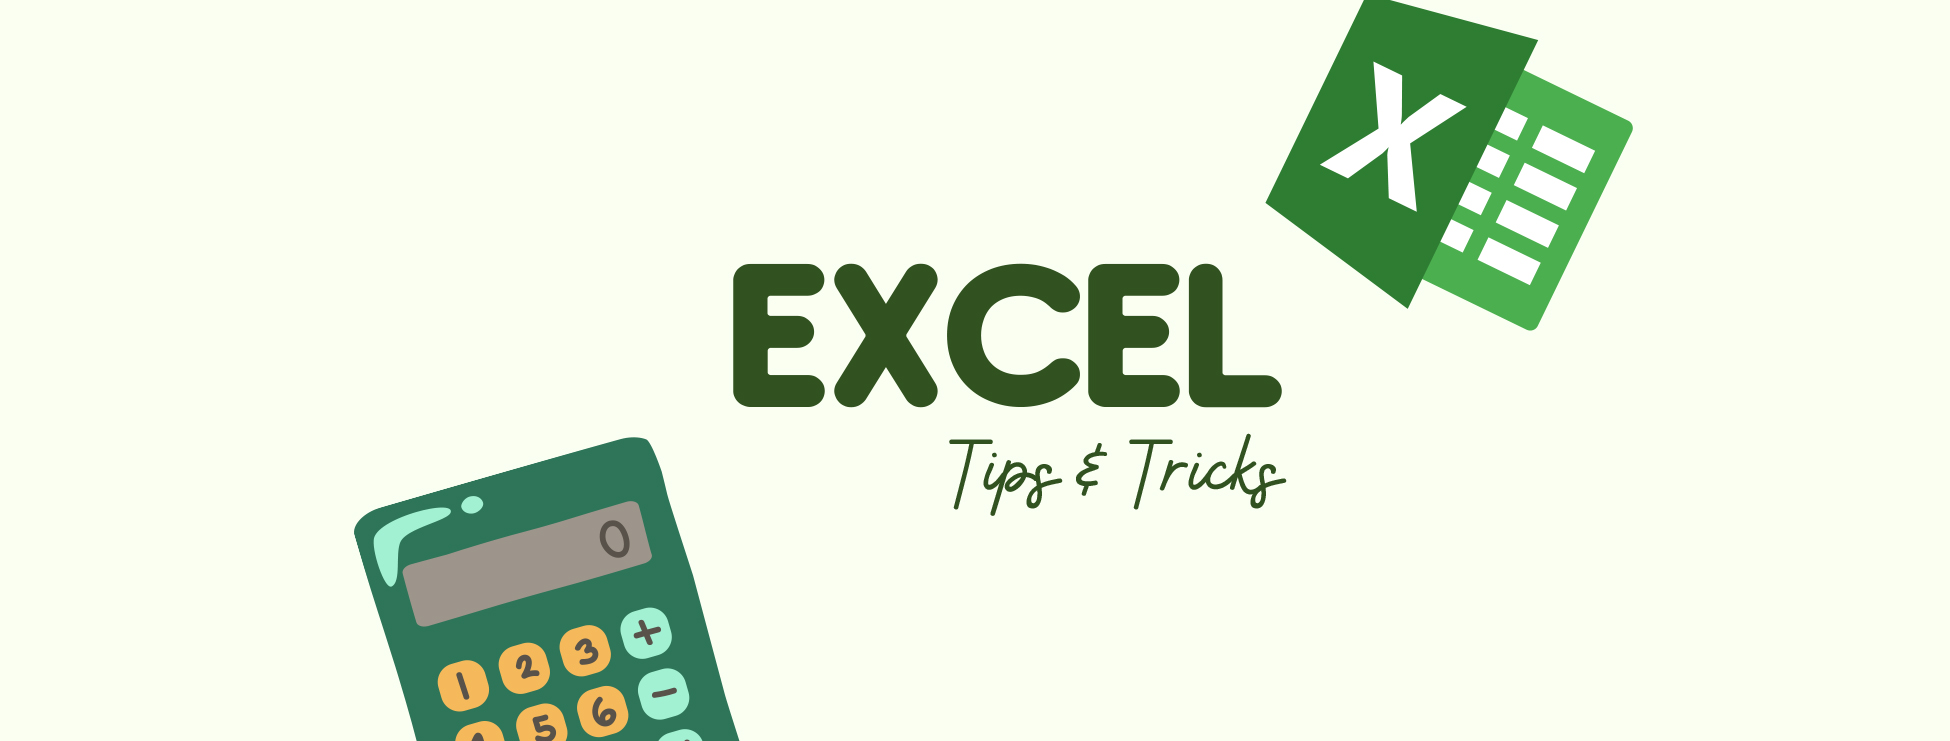 Excel Tips and Tricks - 9 To Get You Started